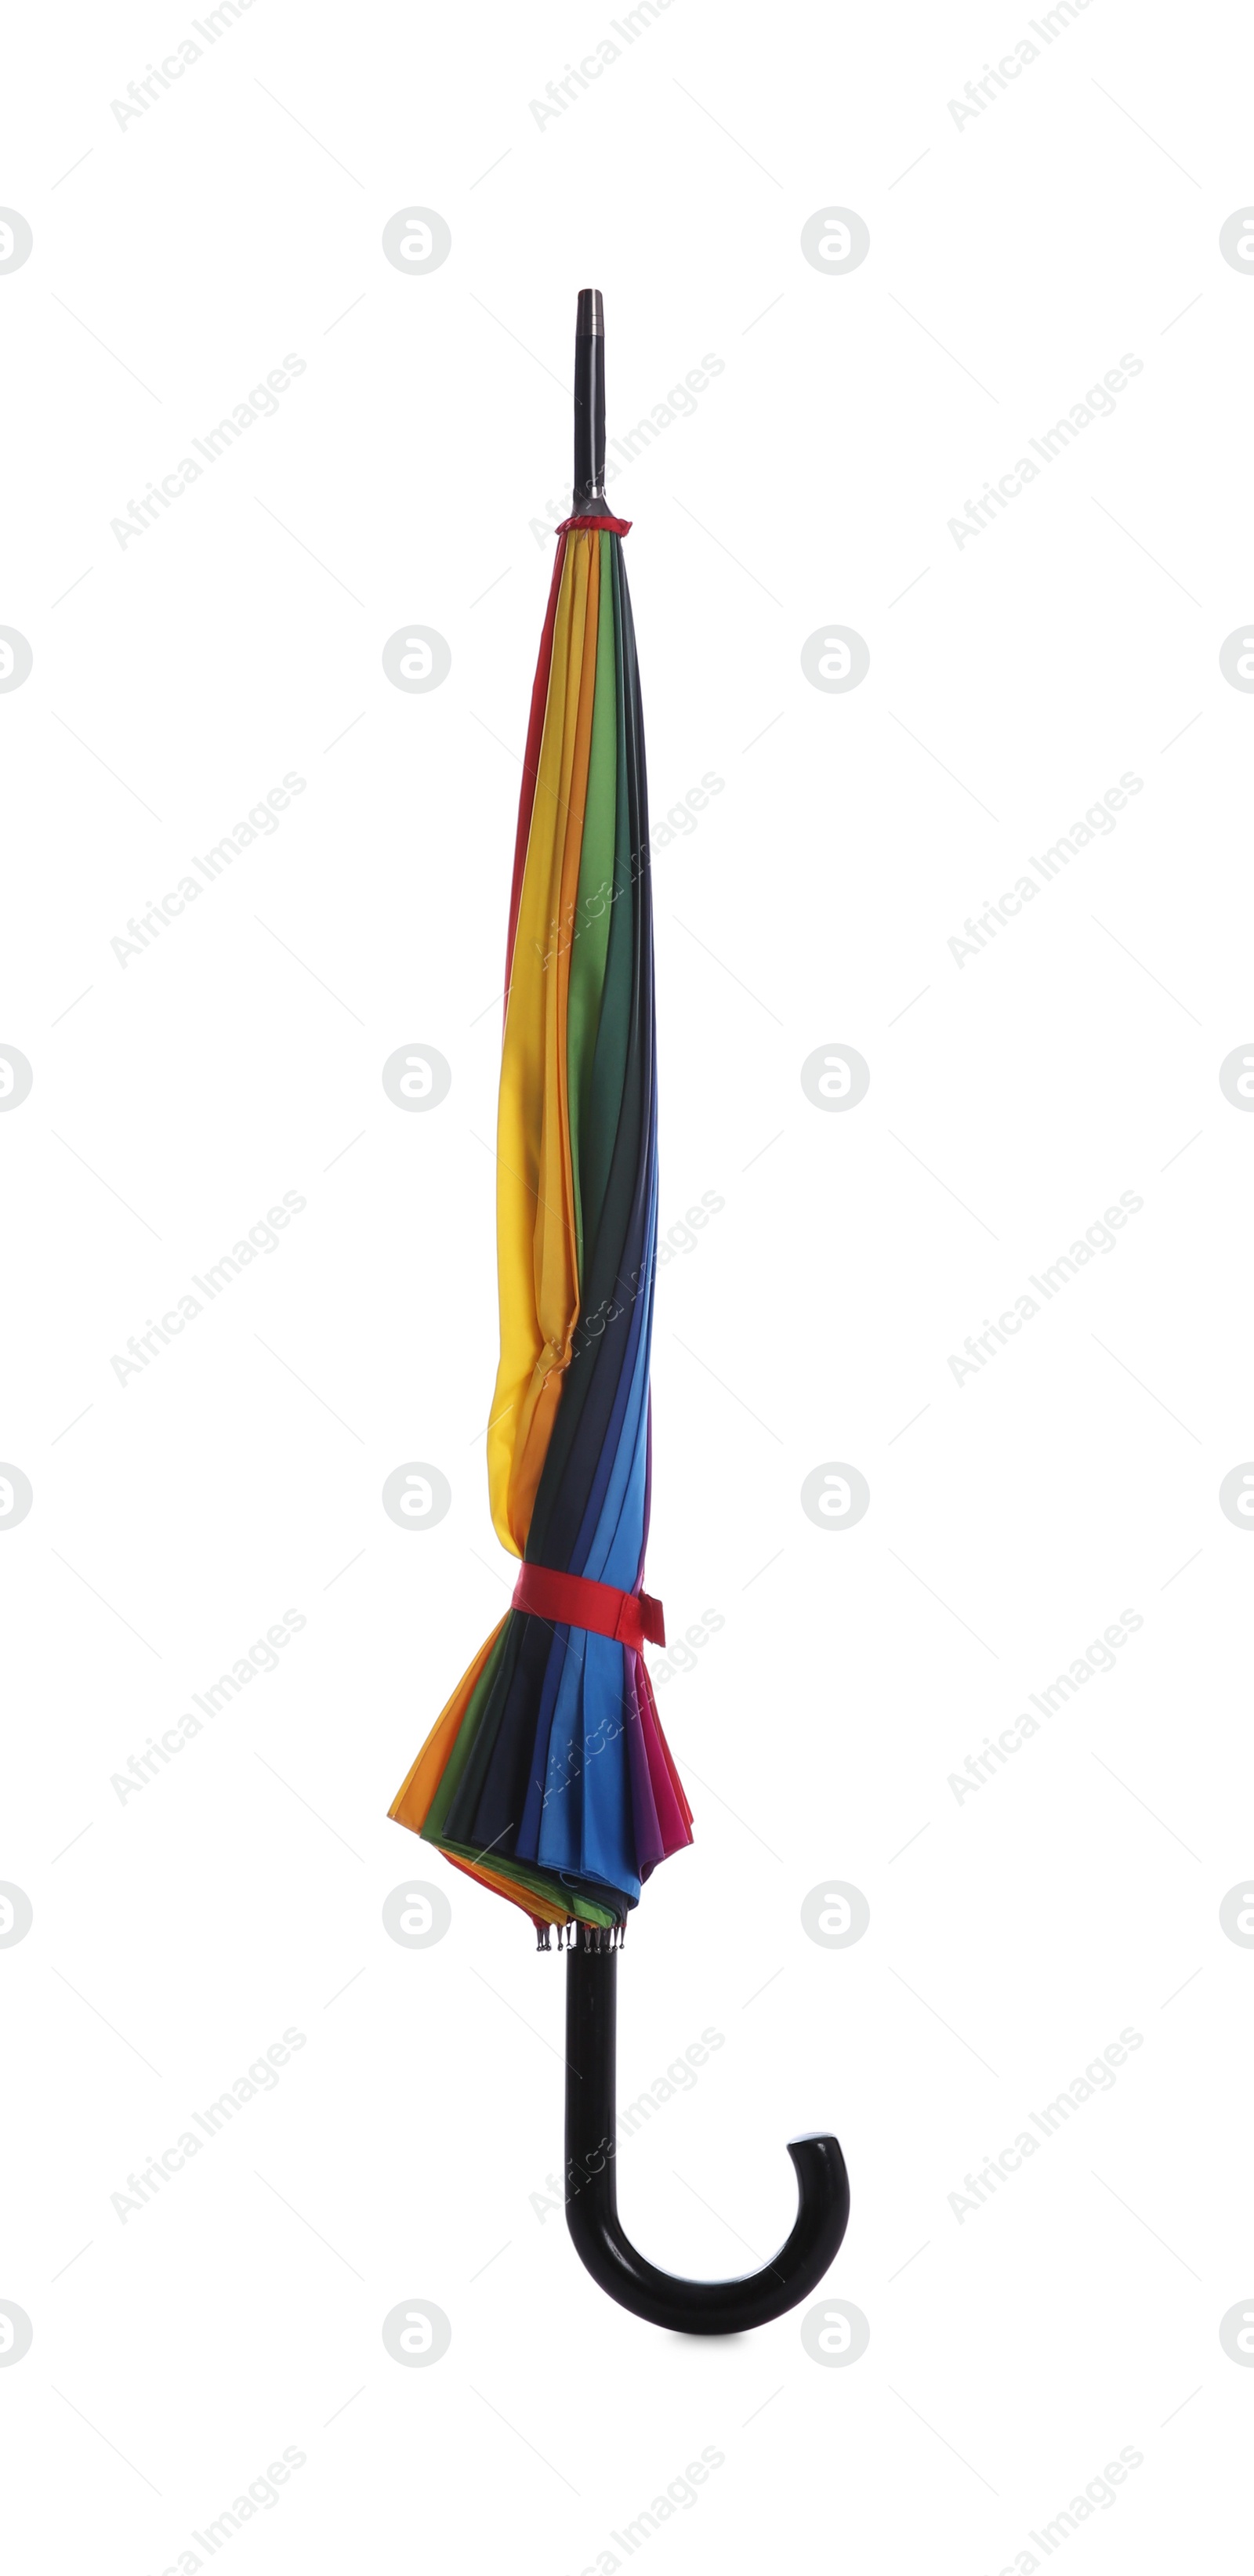 Photo of One closed colorful umbrella isolated on white